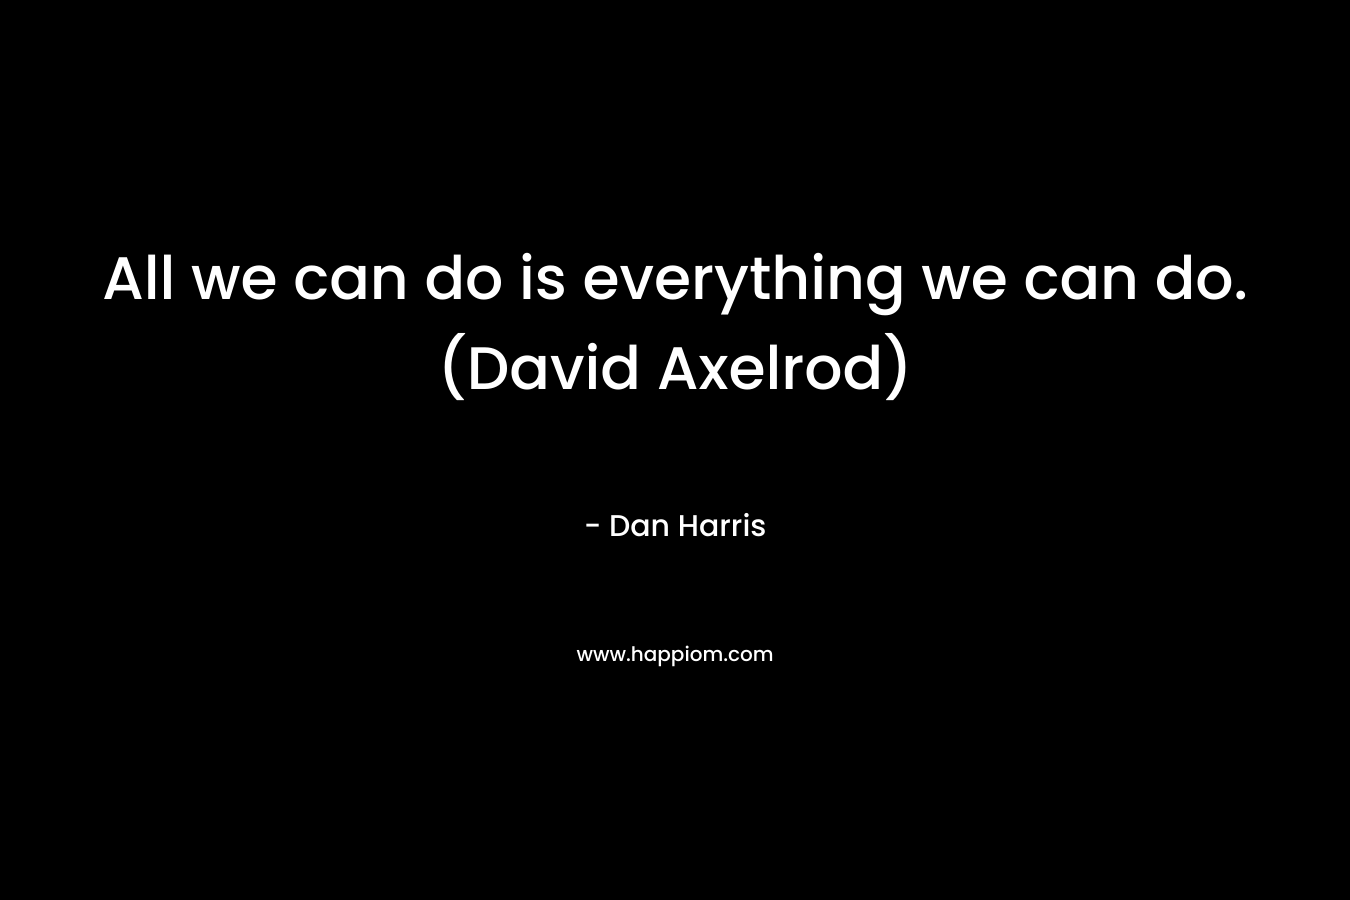 All we can do is everything we can do. (David Axelrod)